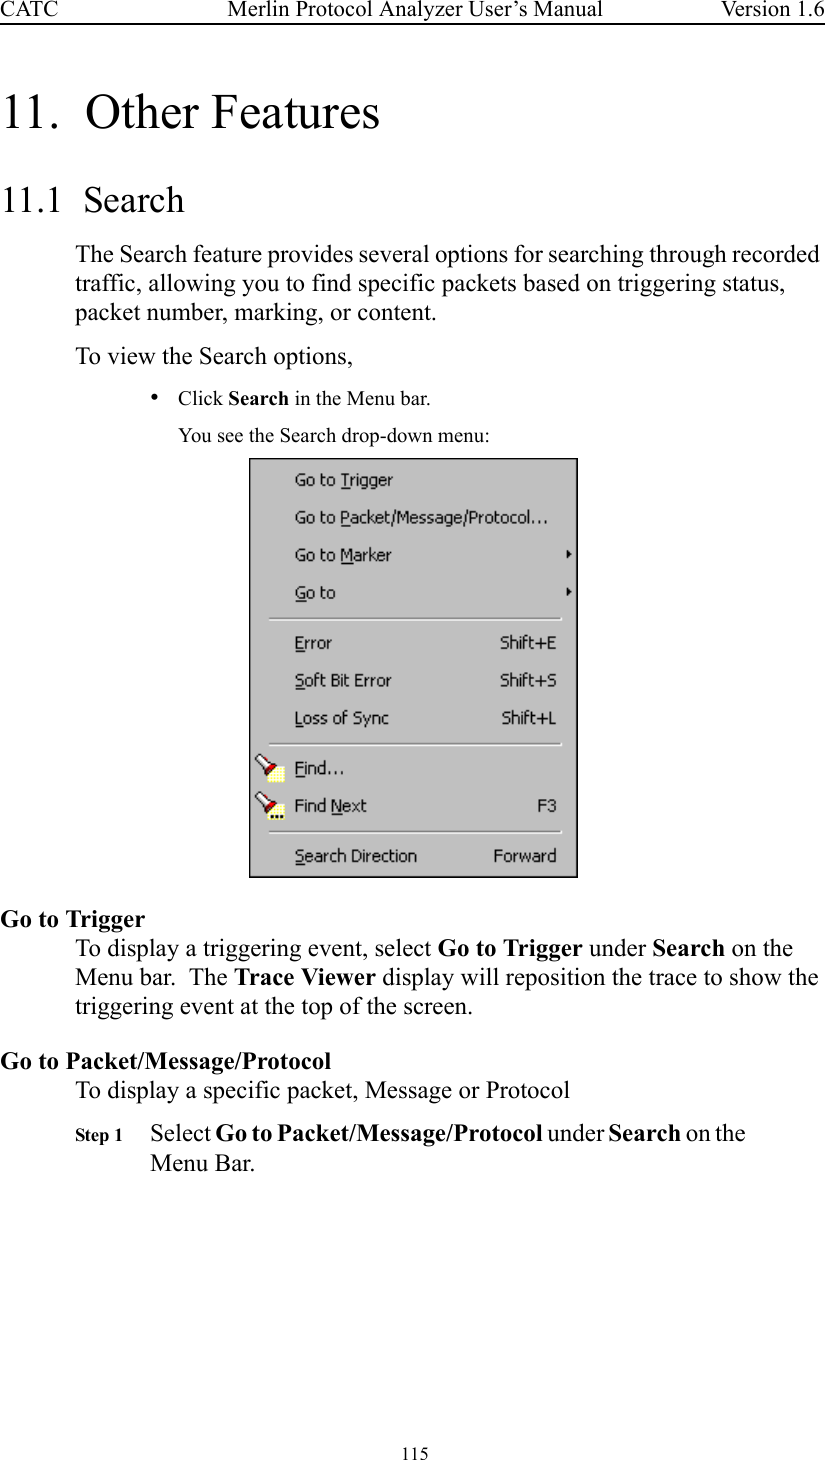  115 Merlin Protocol Analyzer User’s ManualCATC Version 1.611.  Other Features11.1  SearchThe Search feature provides several options for searching through recorded traffic, allowing you to find specific packets based on triggering status, packet number, marking, or content. To view the Search options,•Click Search in the Menu bar.You see the Search drop-down menu:Go to TriggerTo display a triggering event, select Go to Trigger under Search on the Menu bar.  The Trace Viewer display will reposition the trace to show the triggering event at the top of the screen.Go to Packet/Message/ProtocolTo display a specific packet, Message or ProtocolStep 1 Select Go to Packet/Message/Protocol under Search on the Menu Bar.